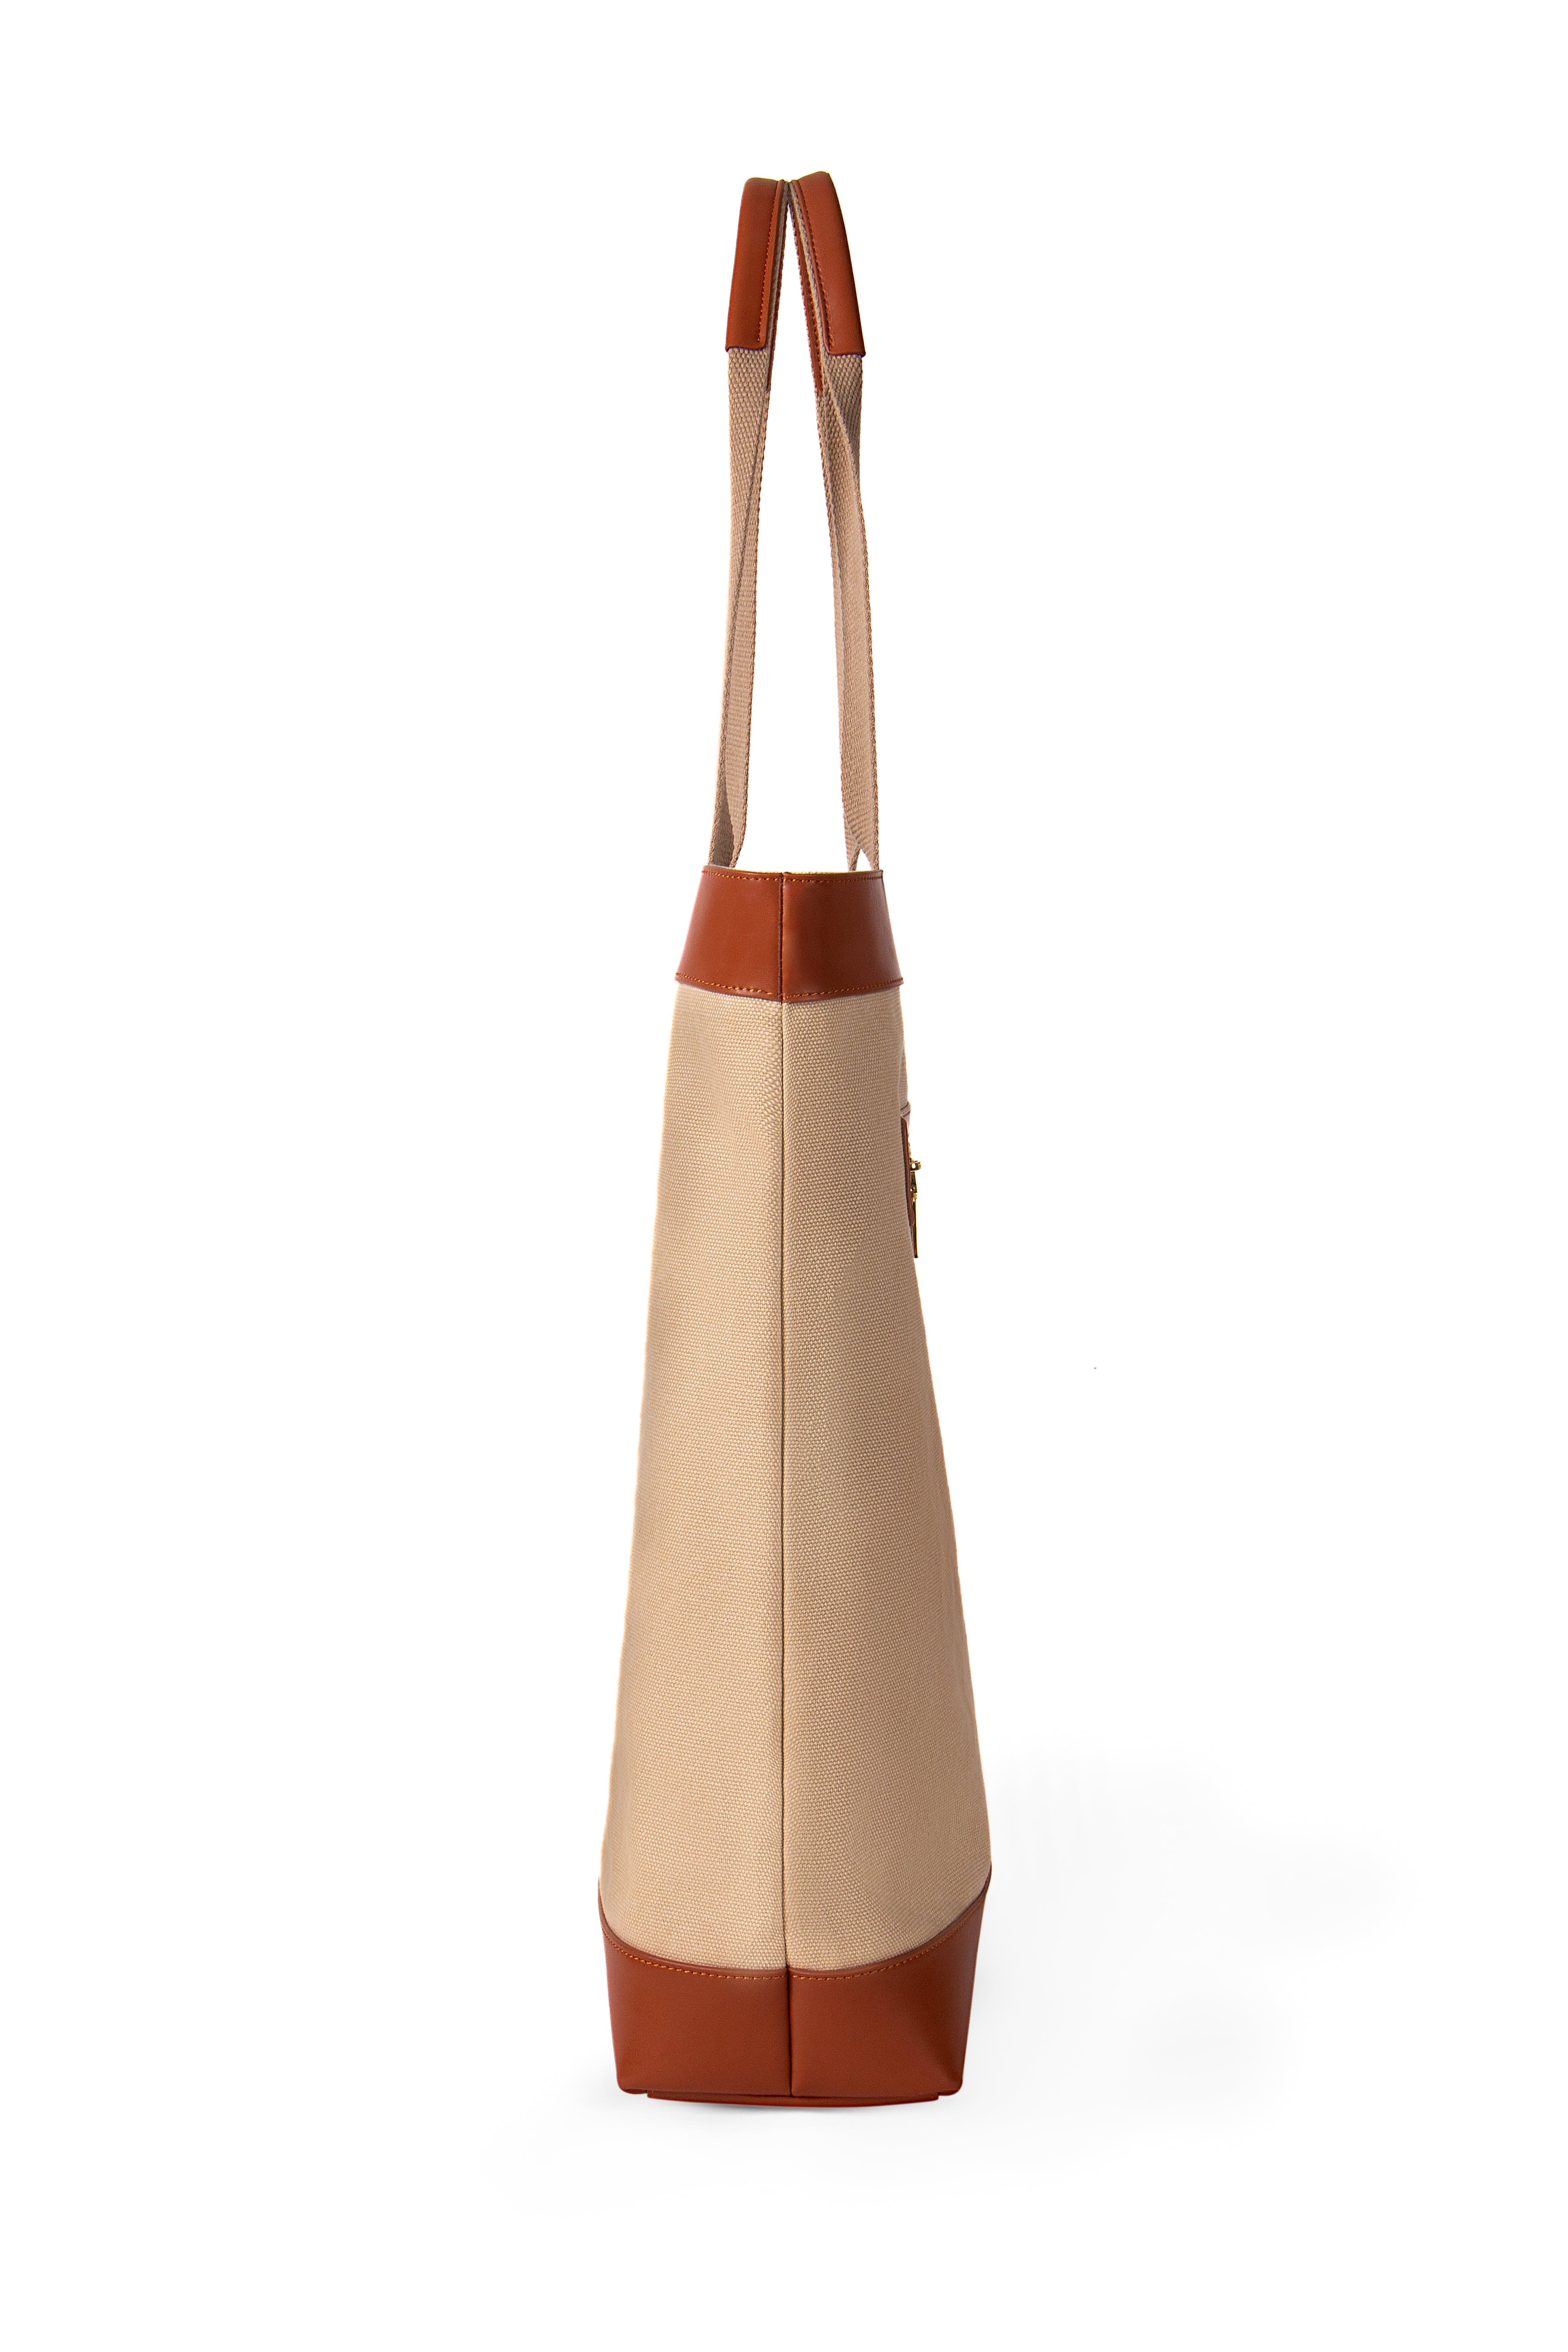 Canvas leather detail tote, for dedicated place for the all rackets of Yours.